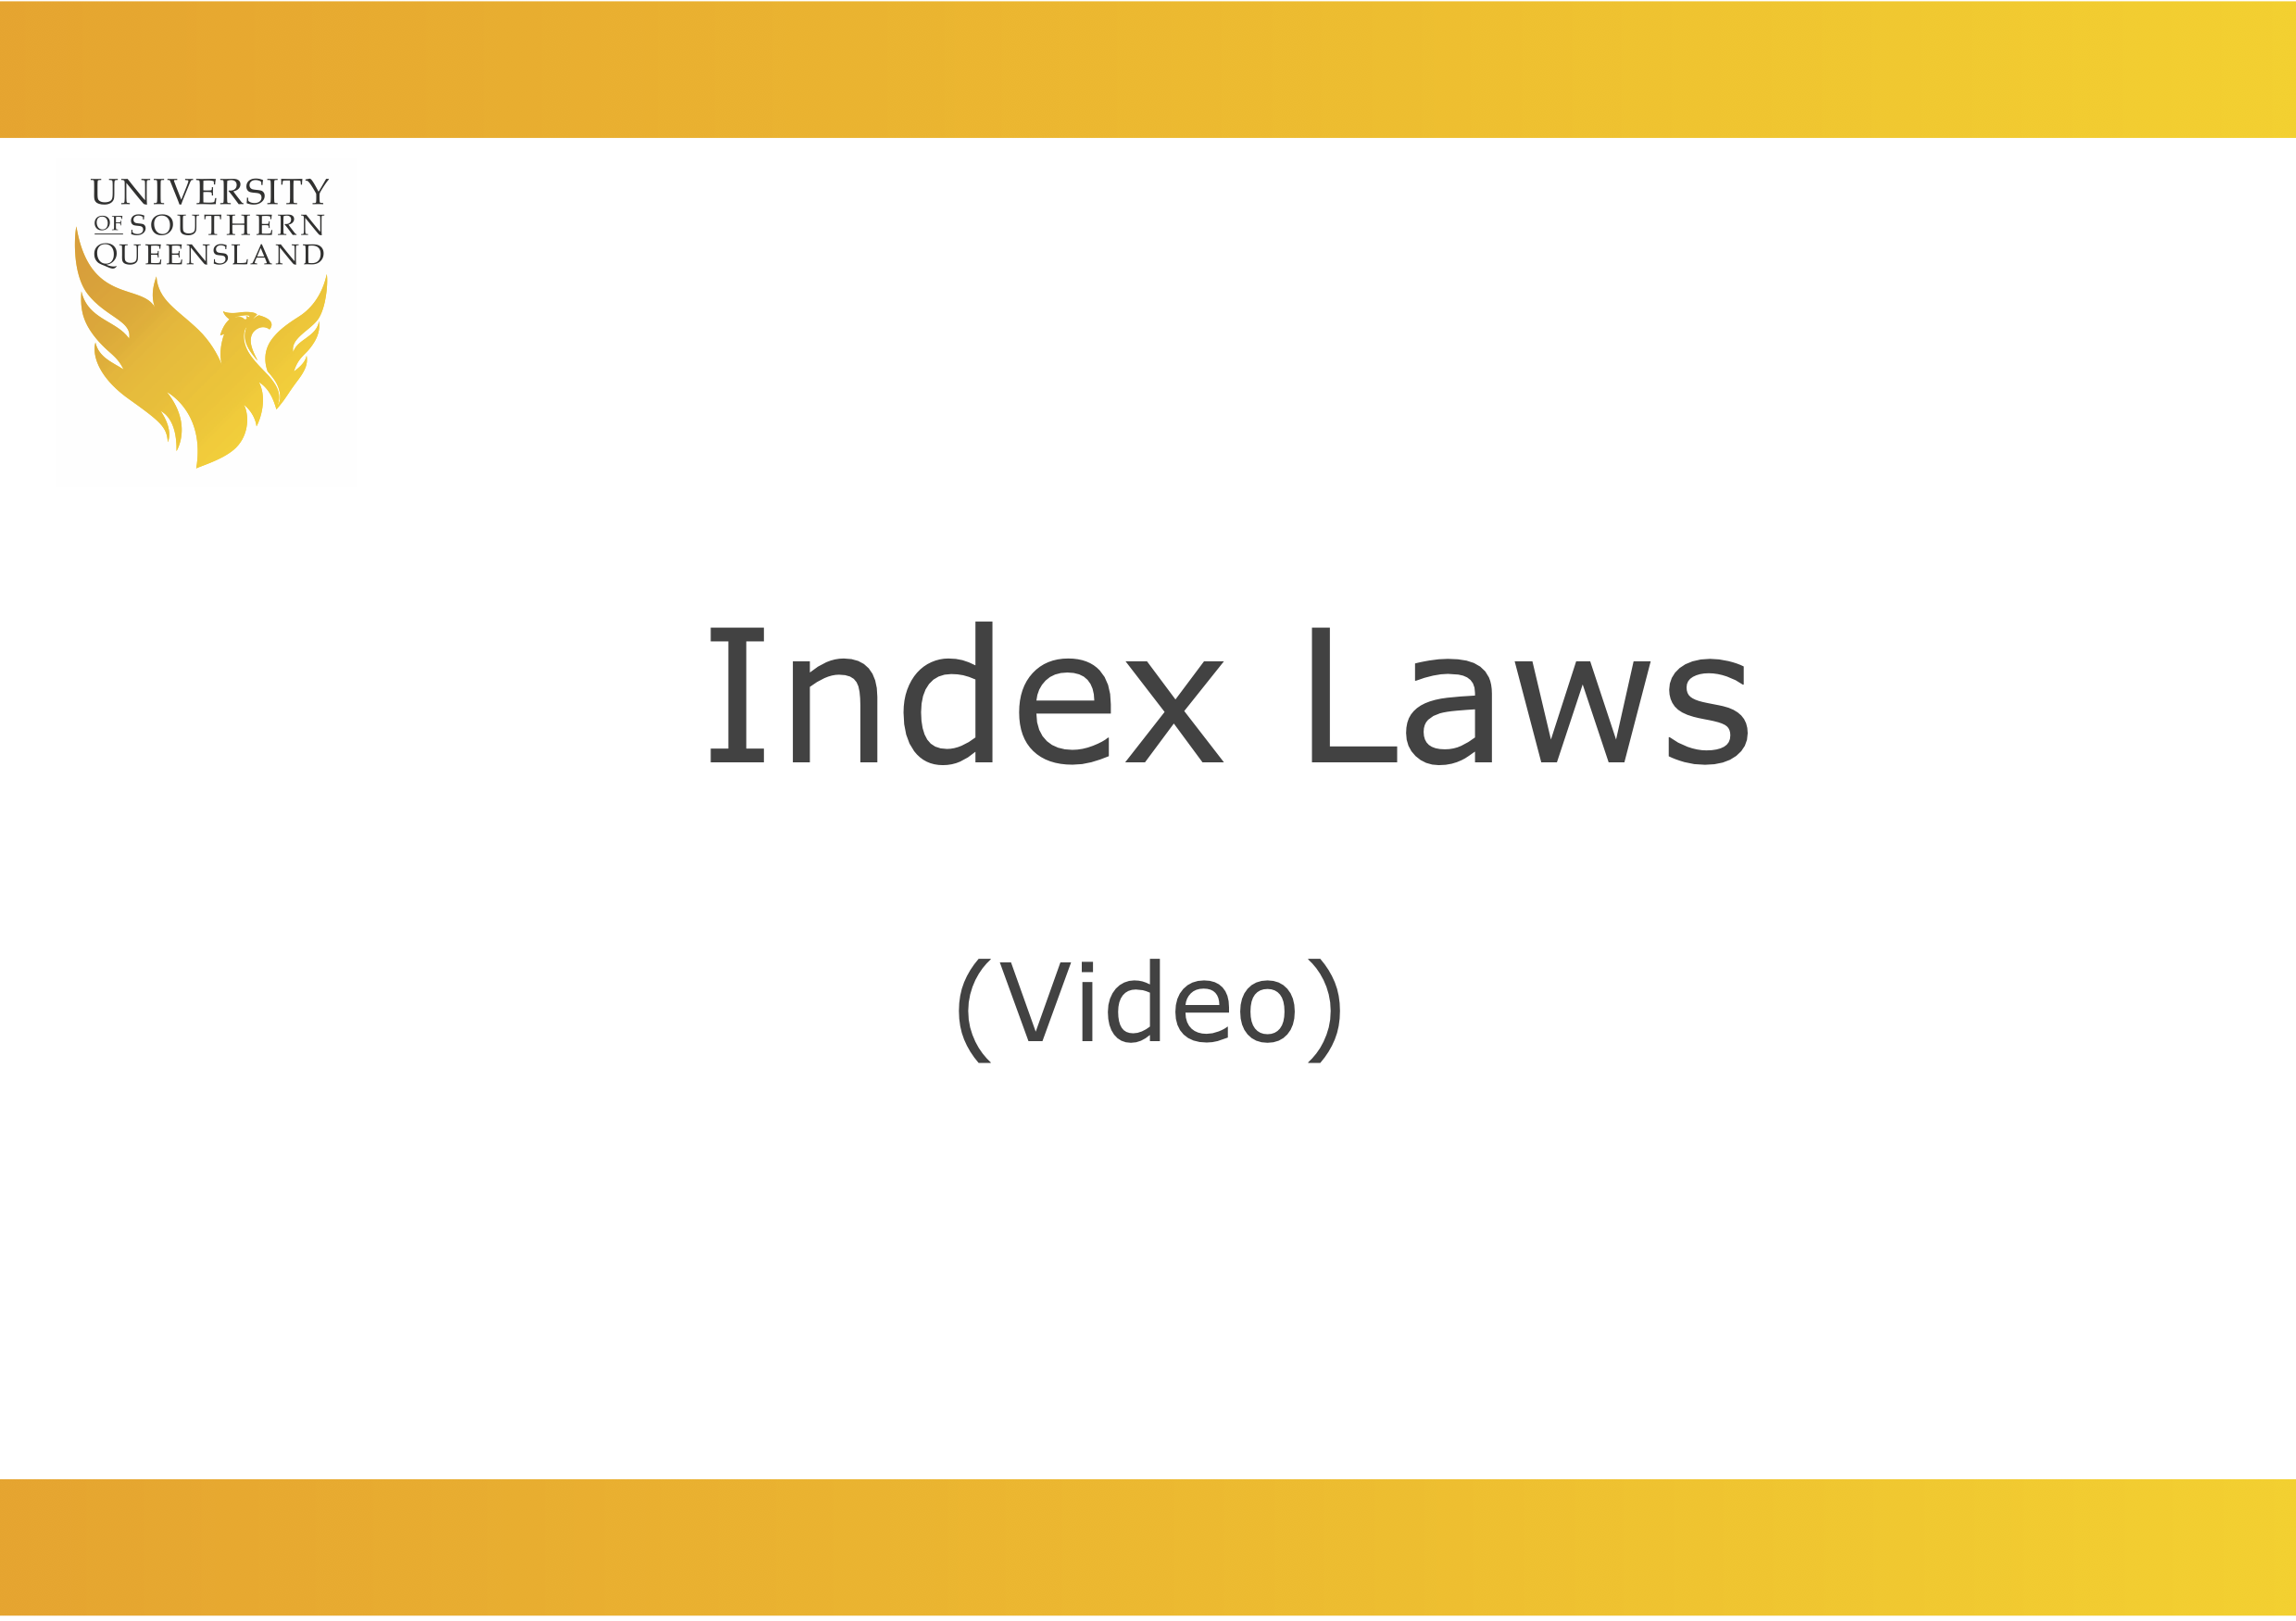 index laws image